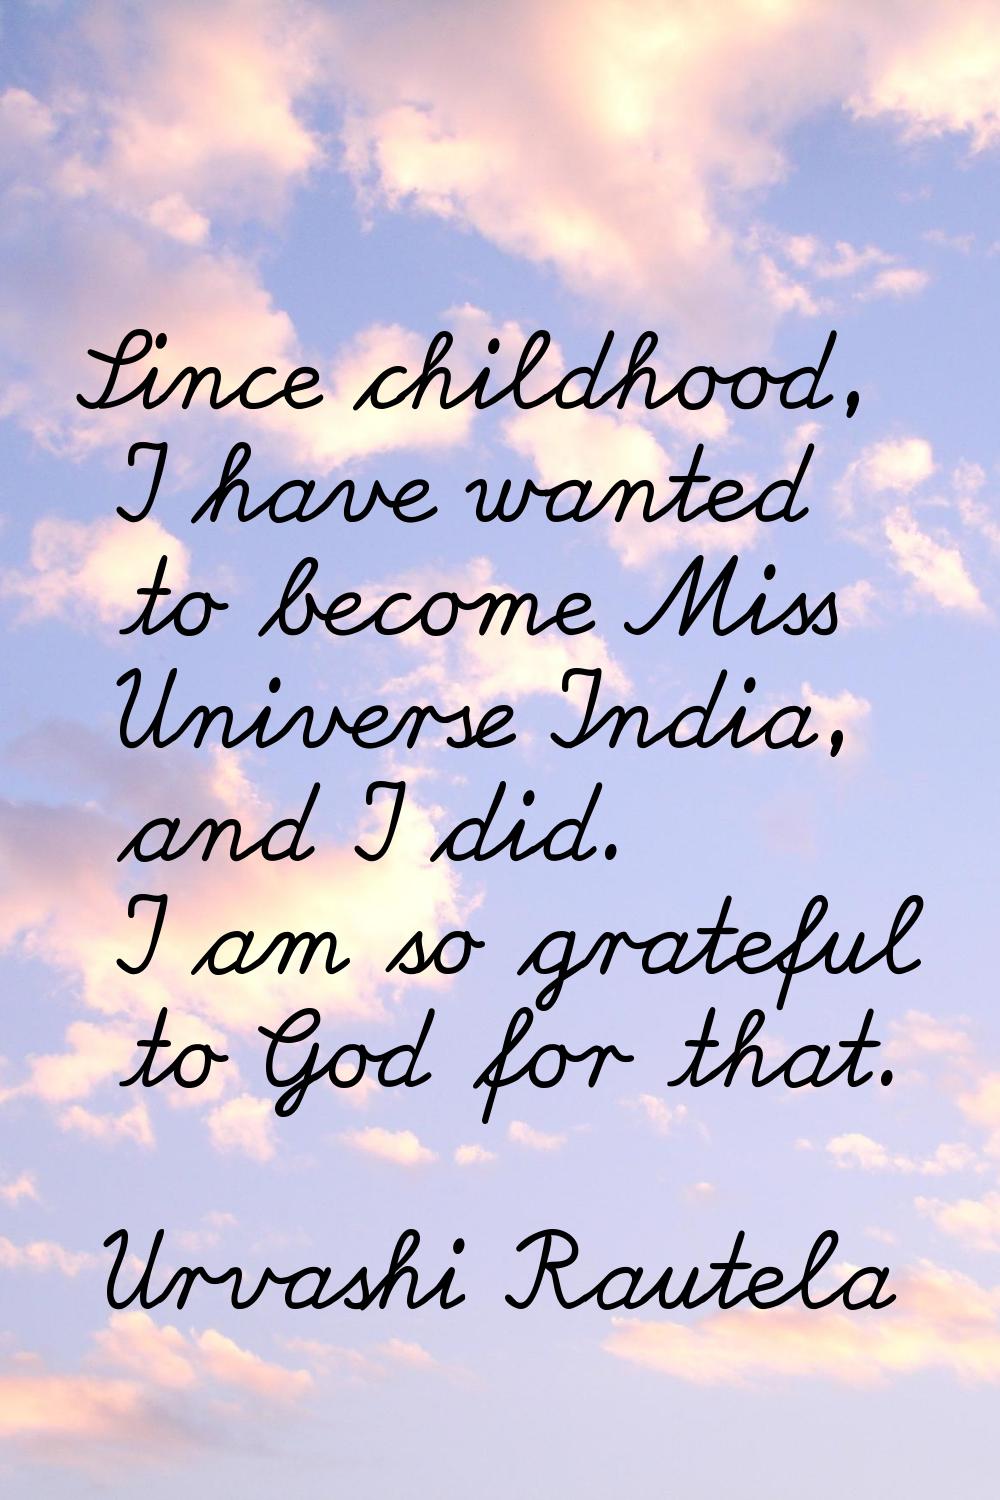 Since childhood, I have wanted to become Miss Universe India, and I did. I am so grateful to God fo